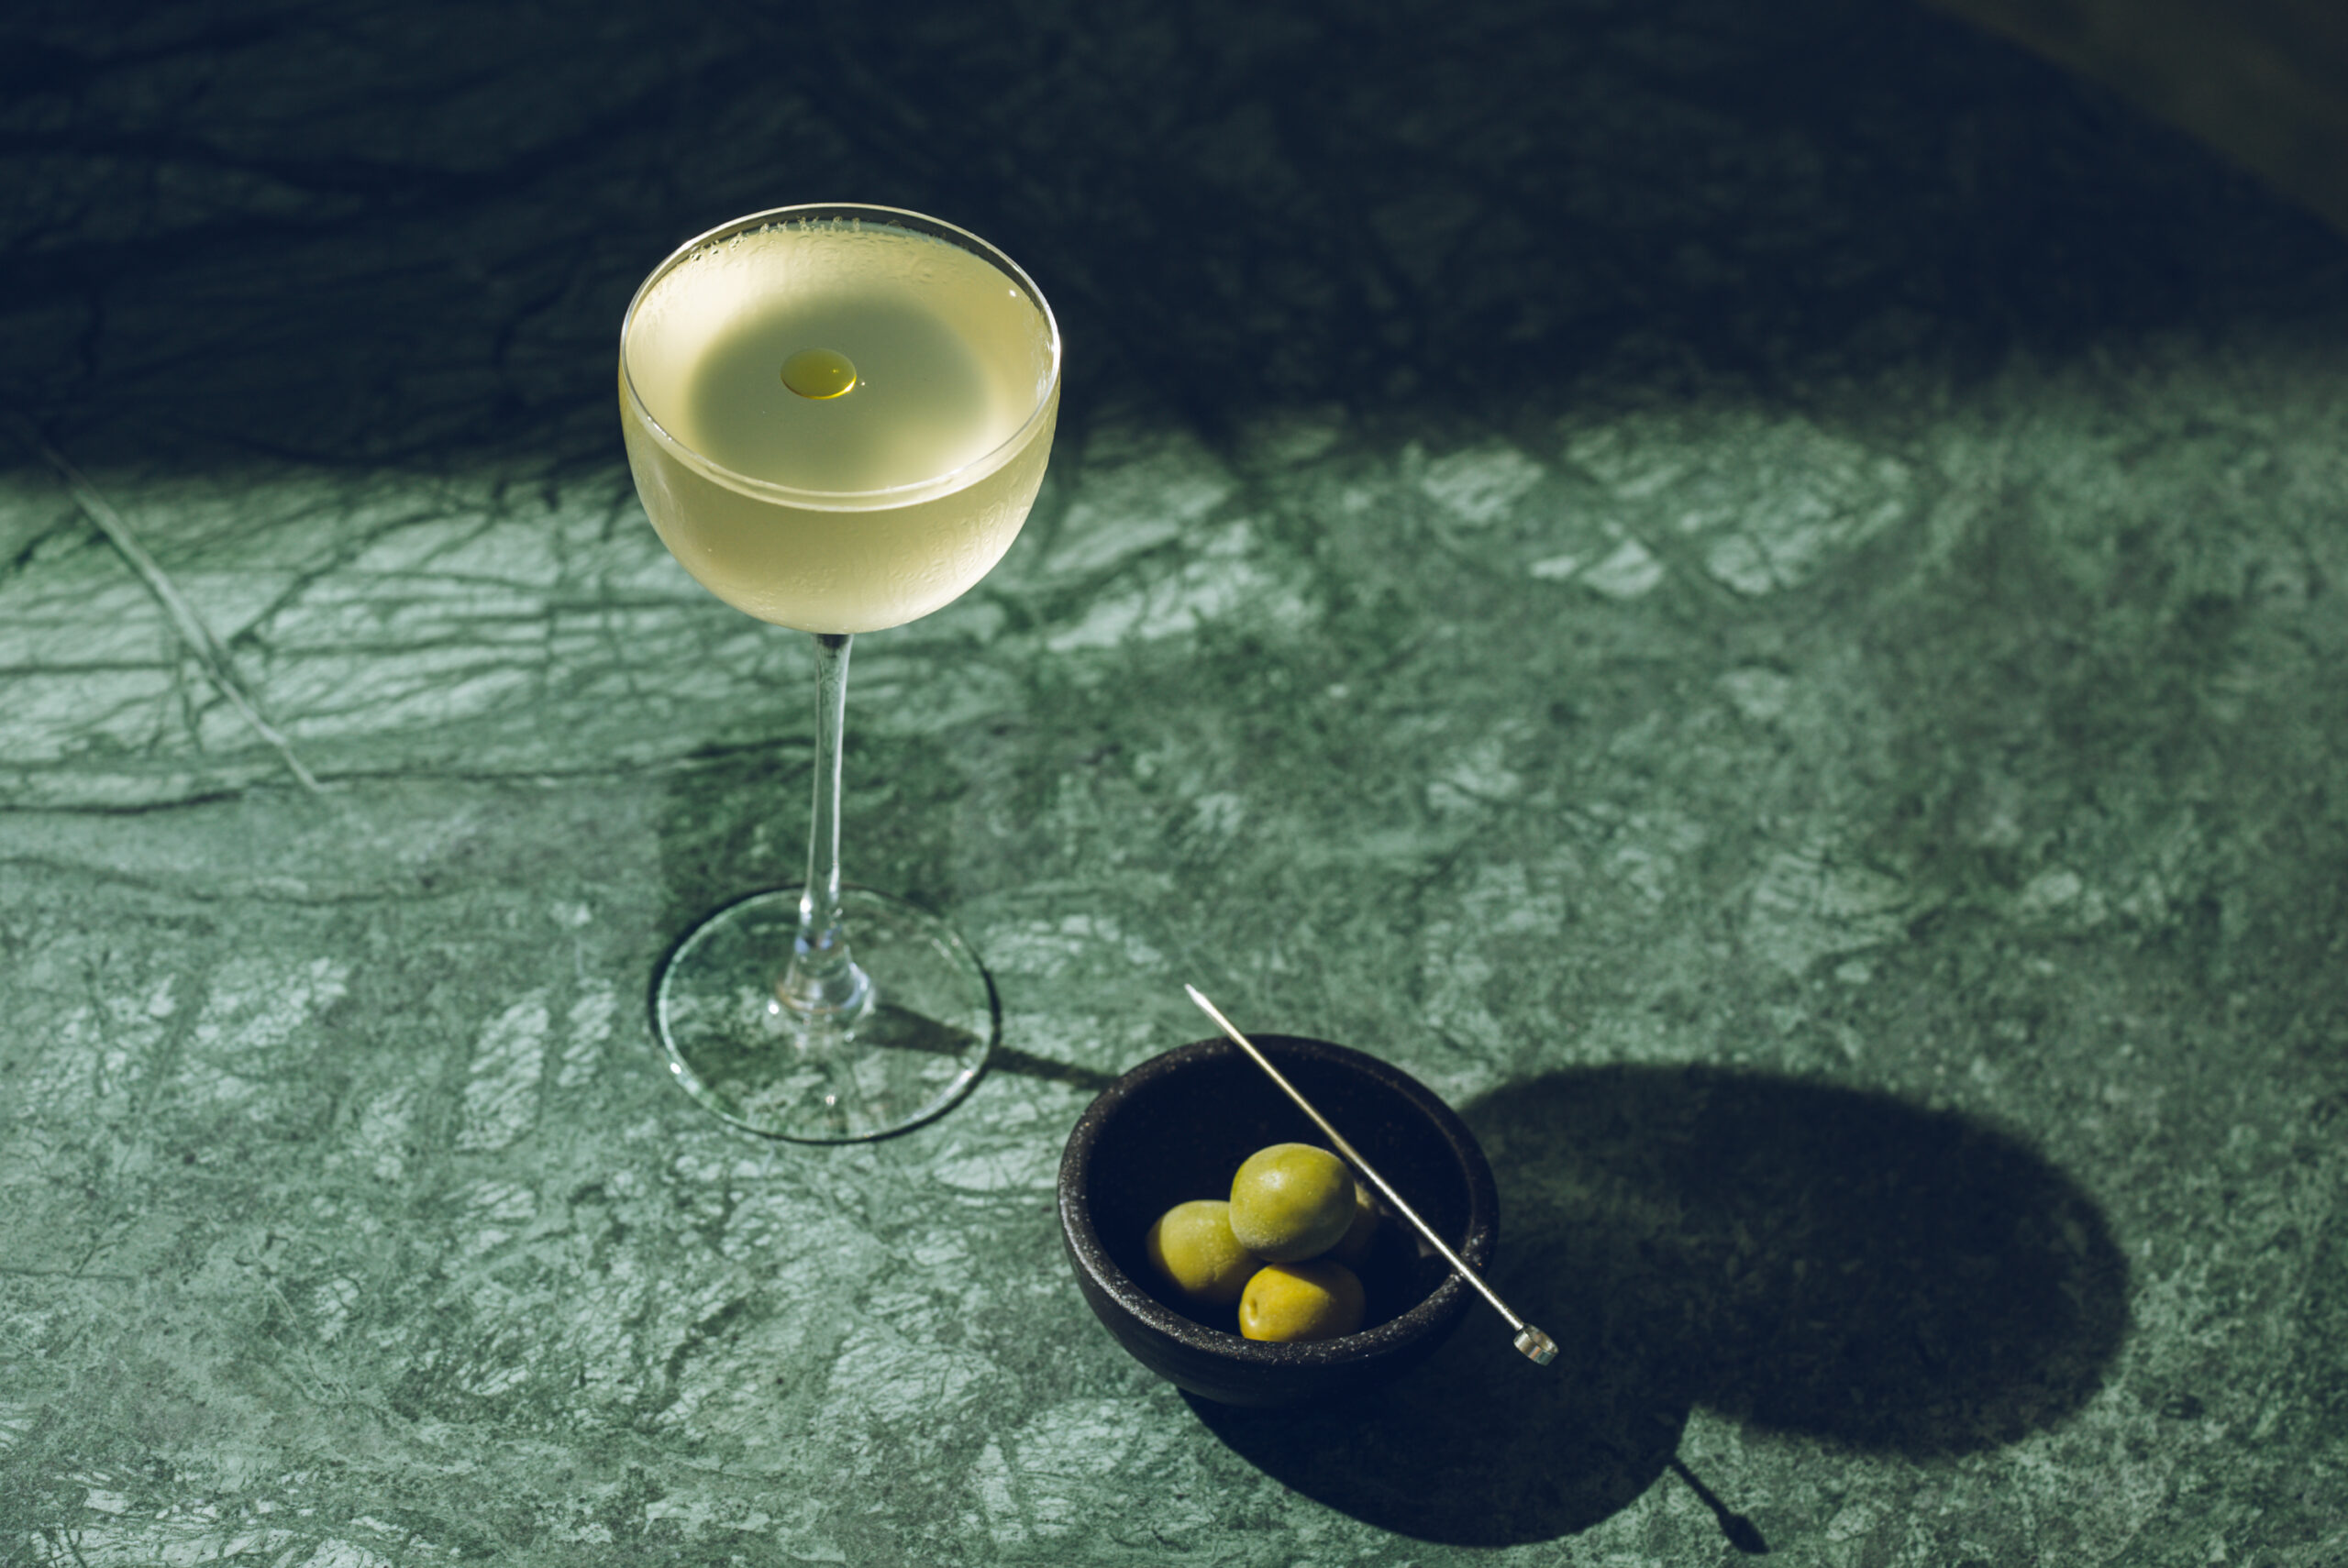 A glass of white wine with olives on a table, creating a delightful combination of flavors and colors.